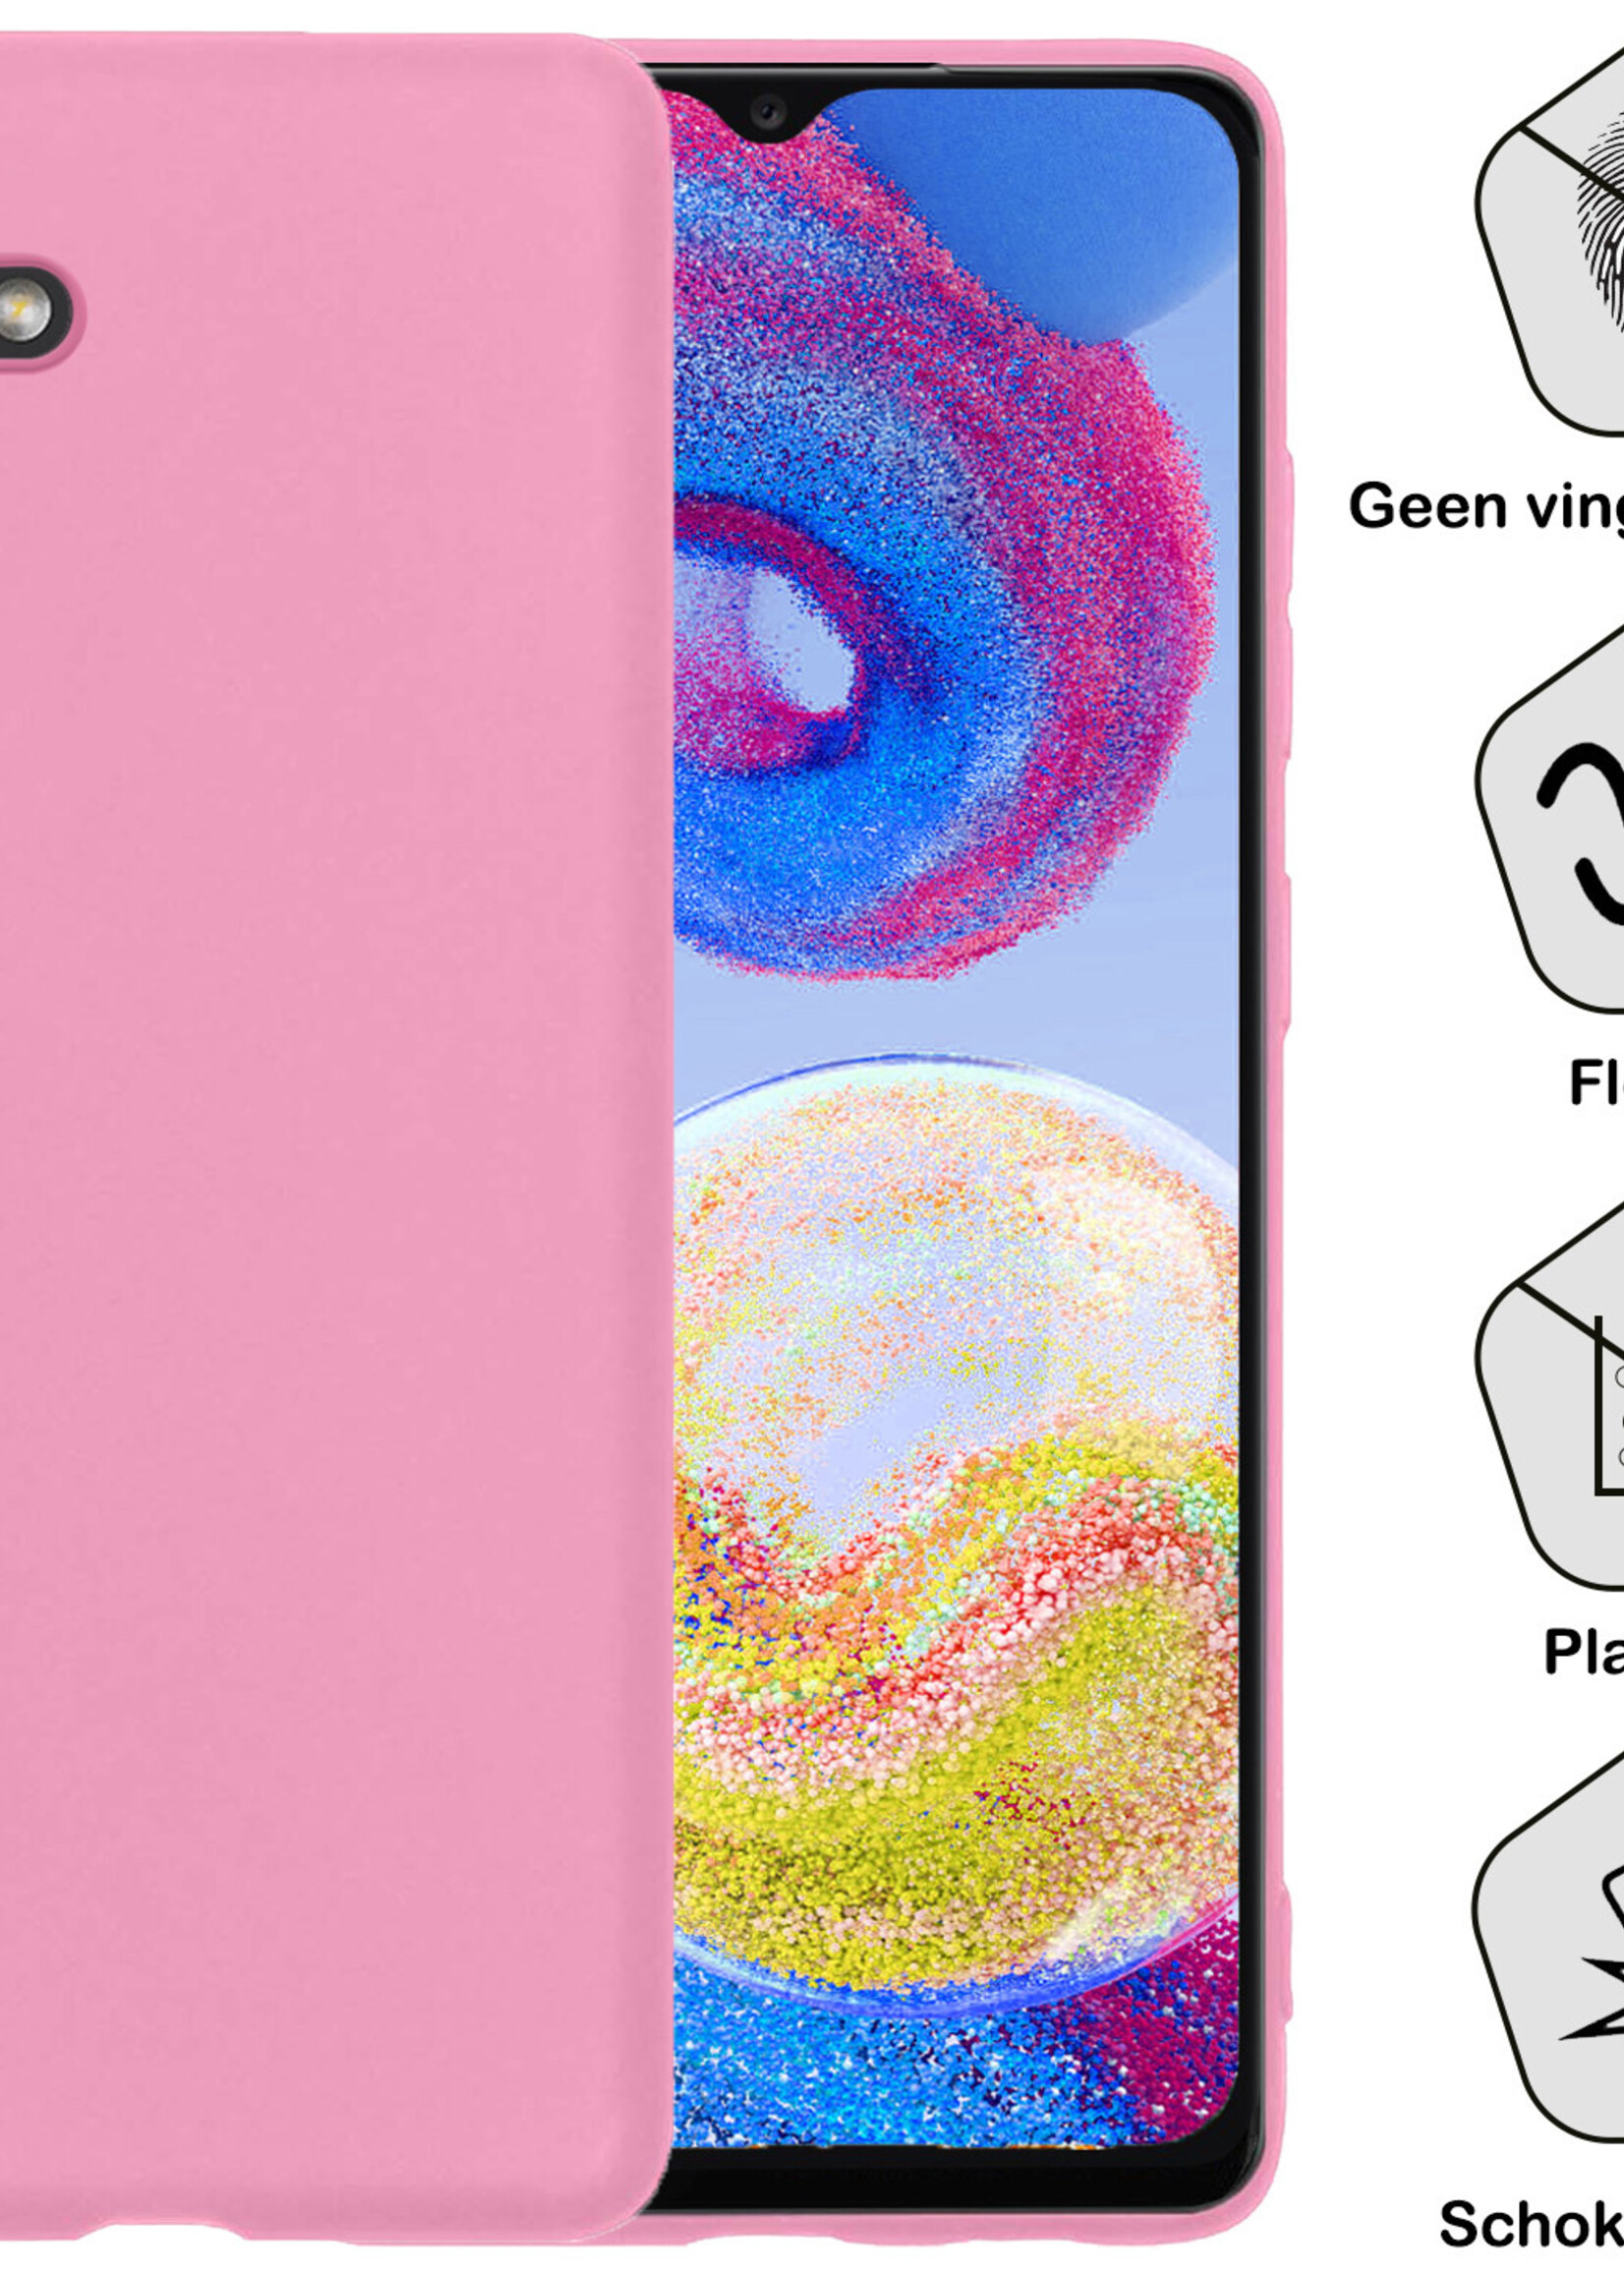 BTH Hoesje Geschikt voor Samsung A04s Hoesje Siliconen Case Hoes - Hoes Geschikt voor Samsung Galaxy A04s Hoes Cover Case - Lichtroze - 2 PACK